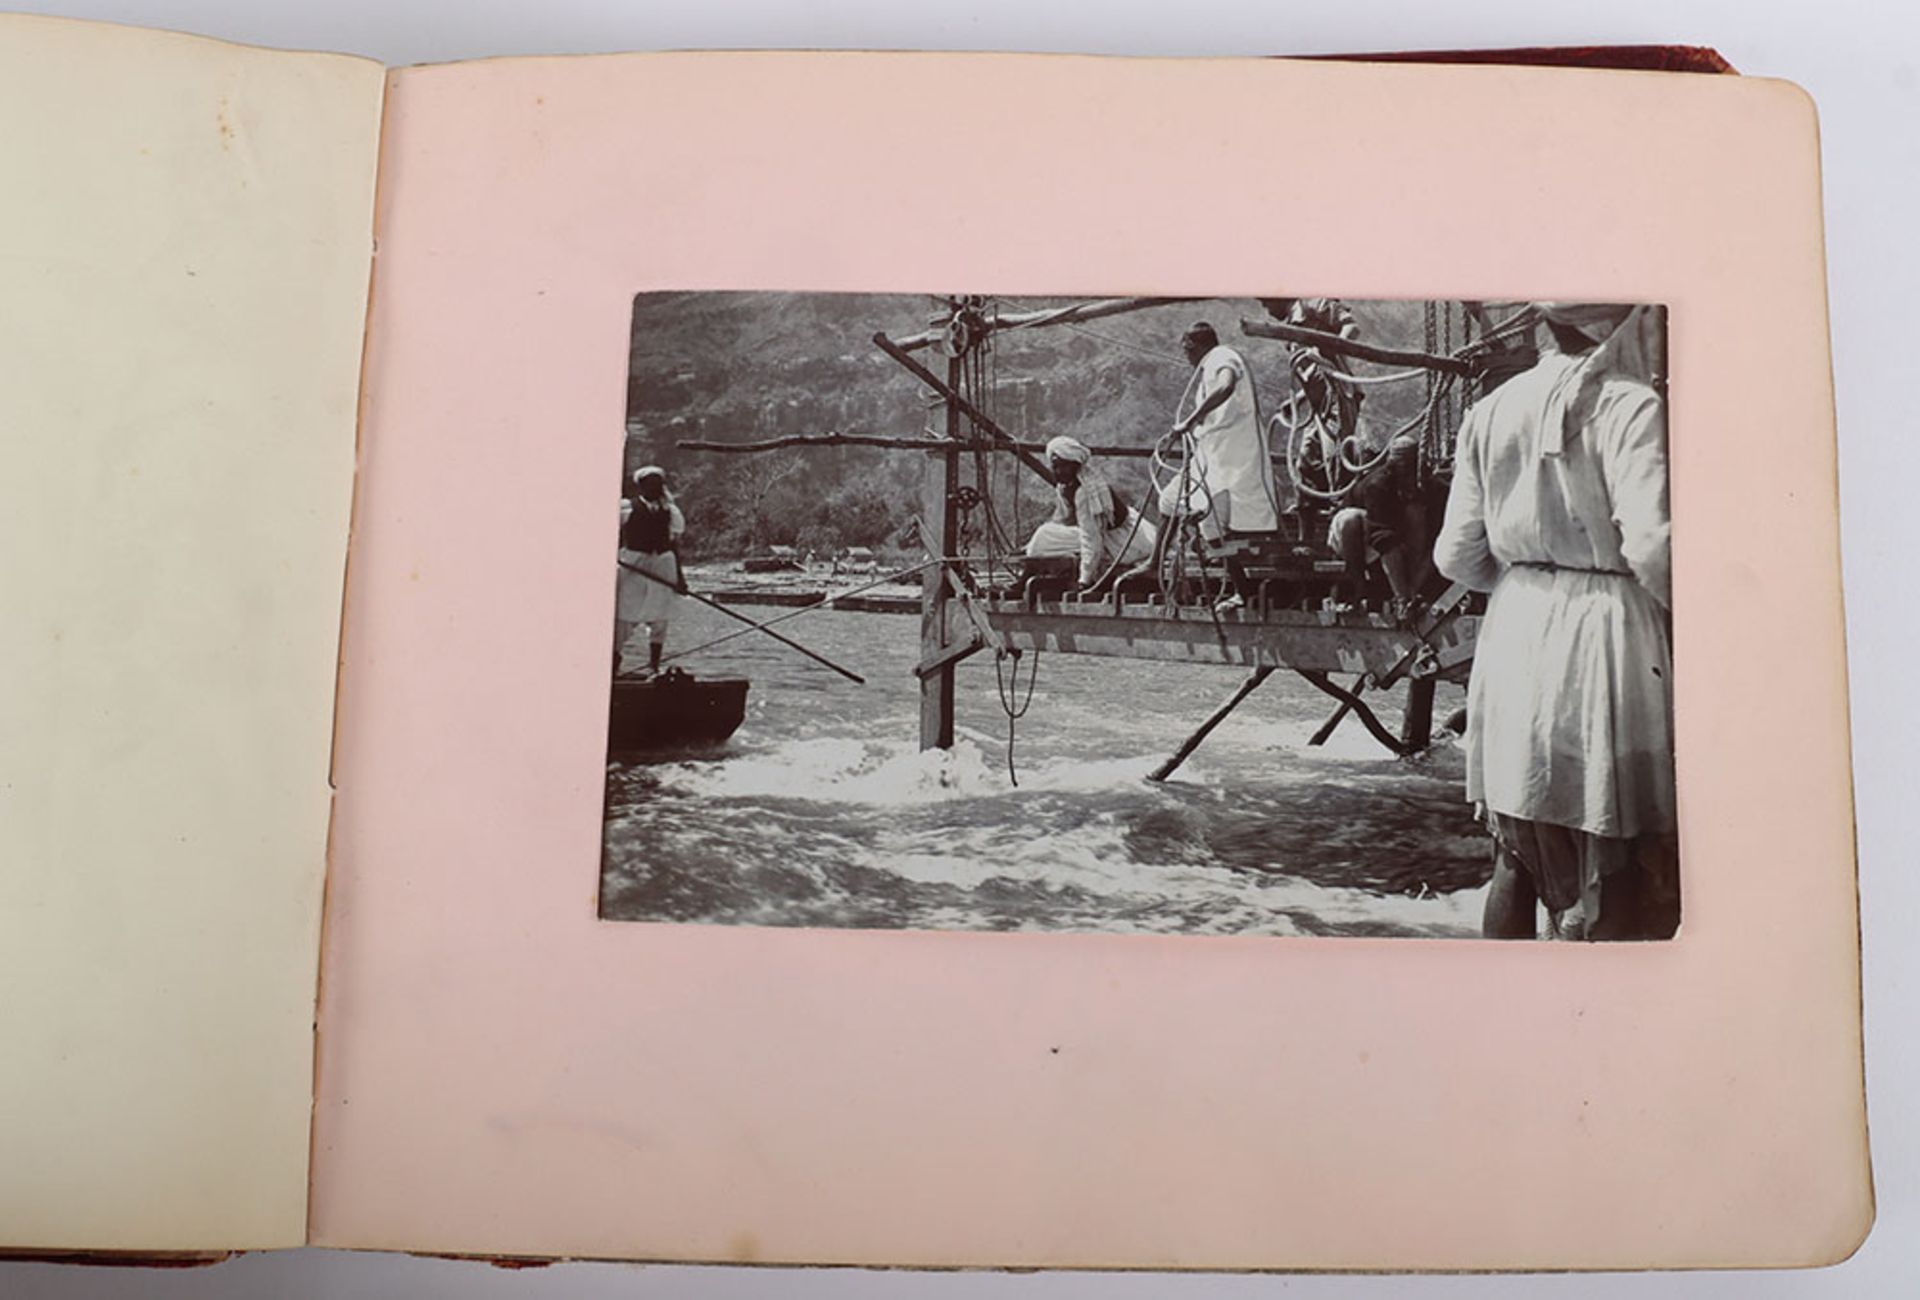 Photograph Album with images of ther Delhi Durbar, troops lining streets, Elephants, sacred cows bel - Image 12 of 48